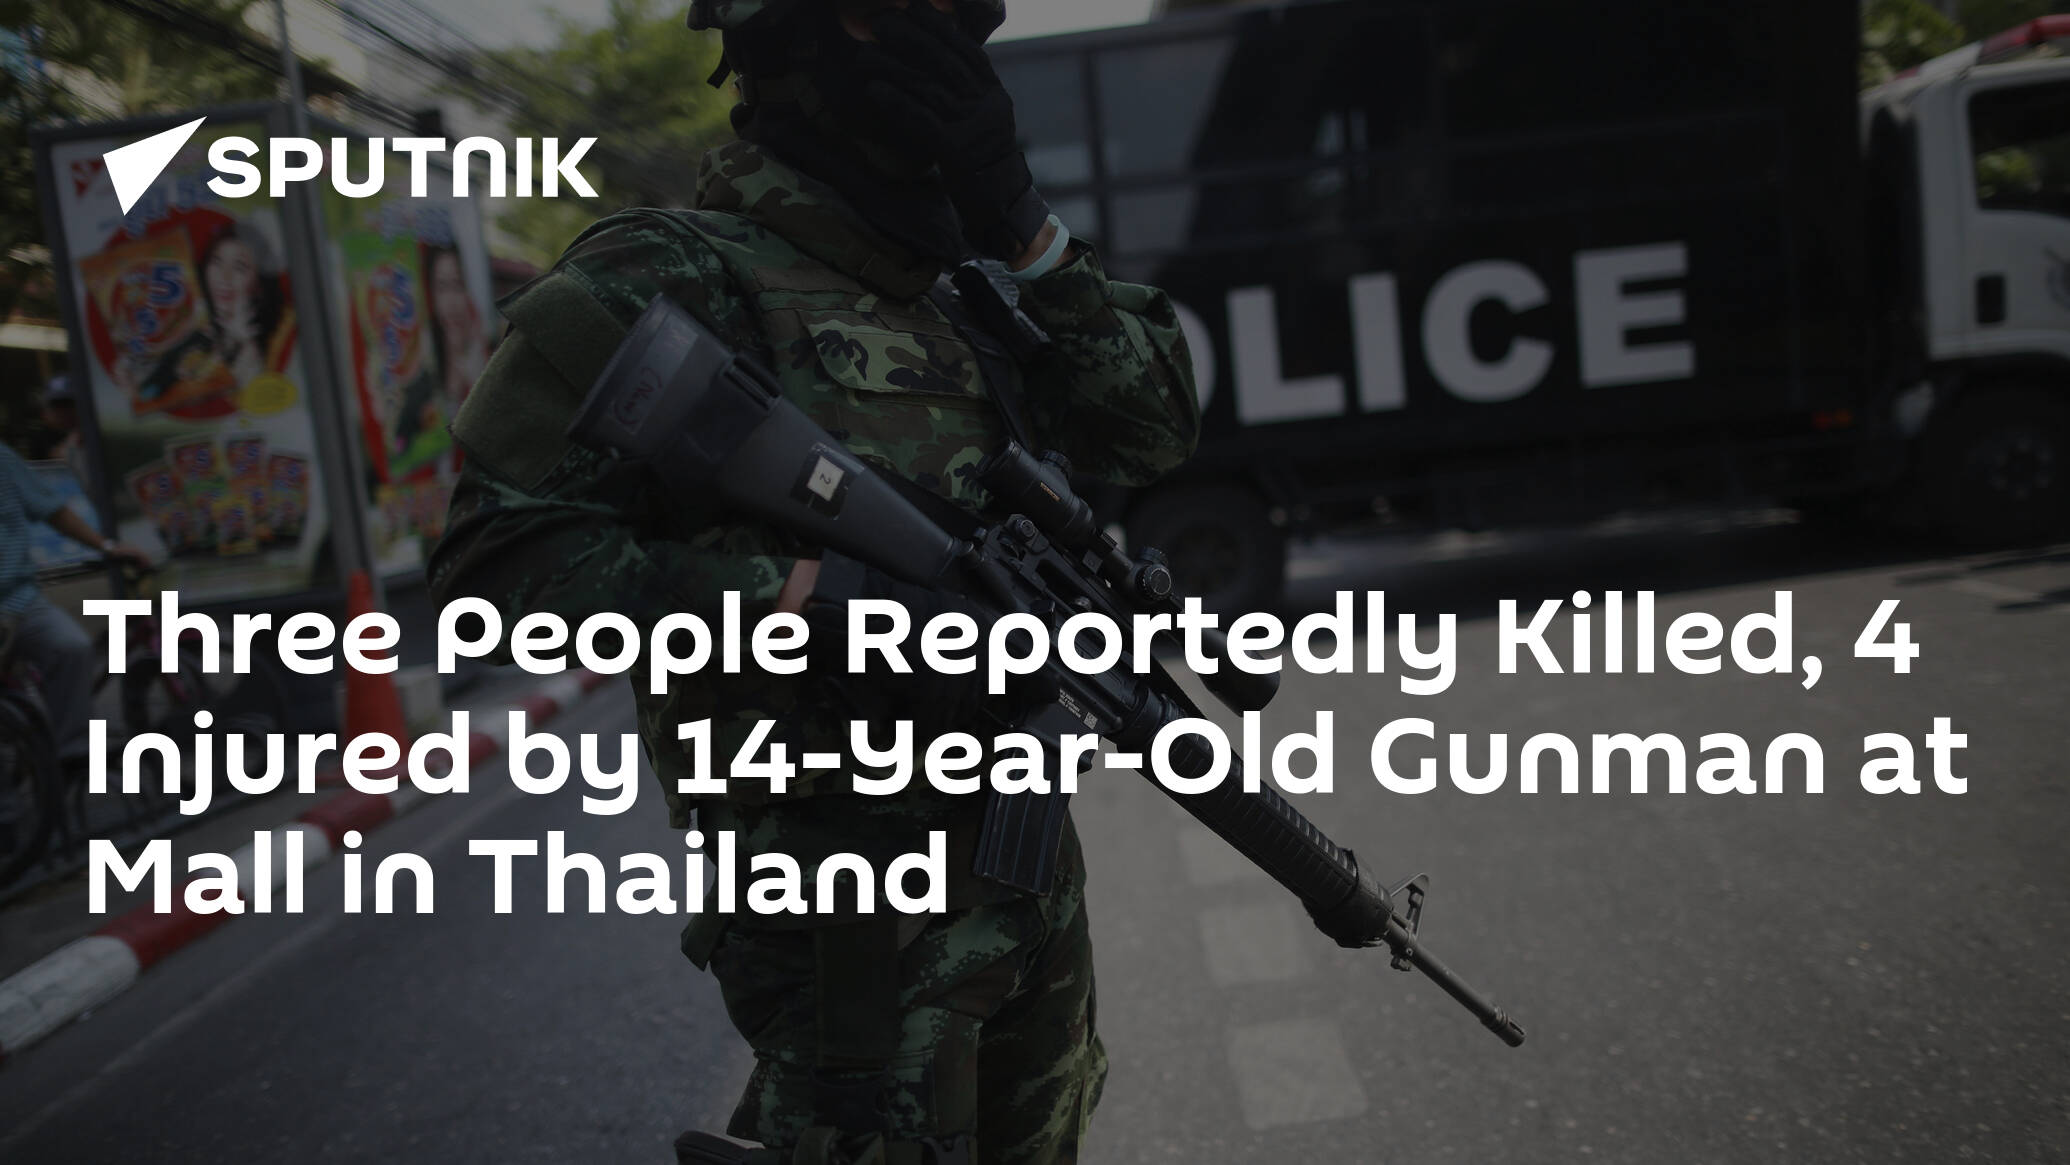 Three People Reportedly Killed, 4 Injured by 14-Year-Old Gunman at Mall in Thailand